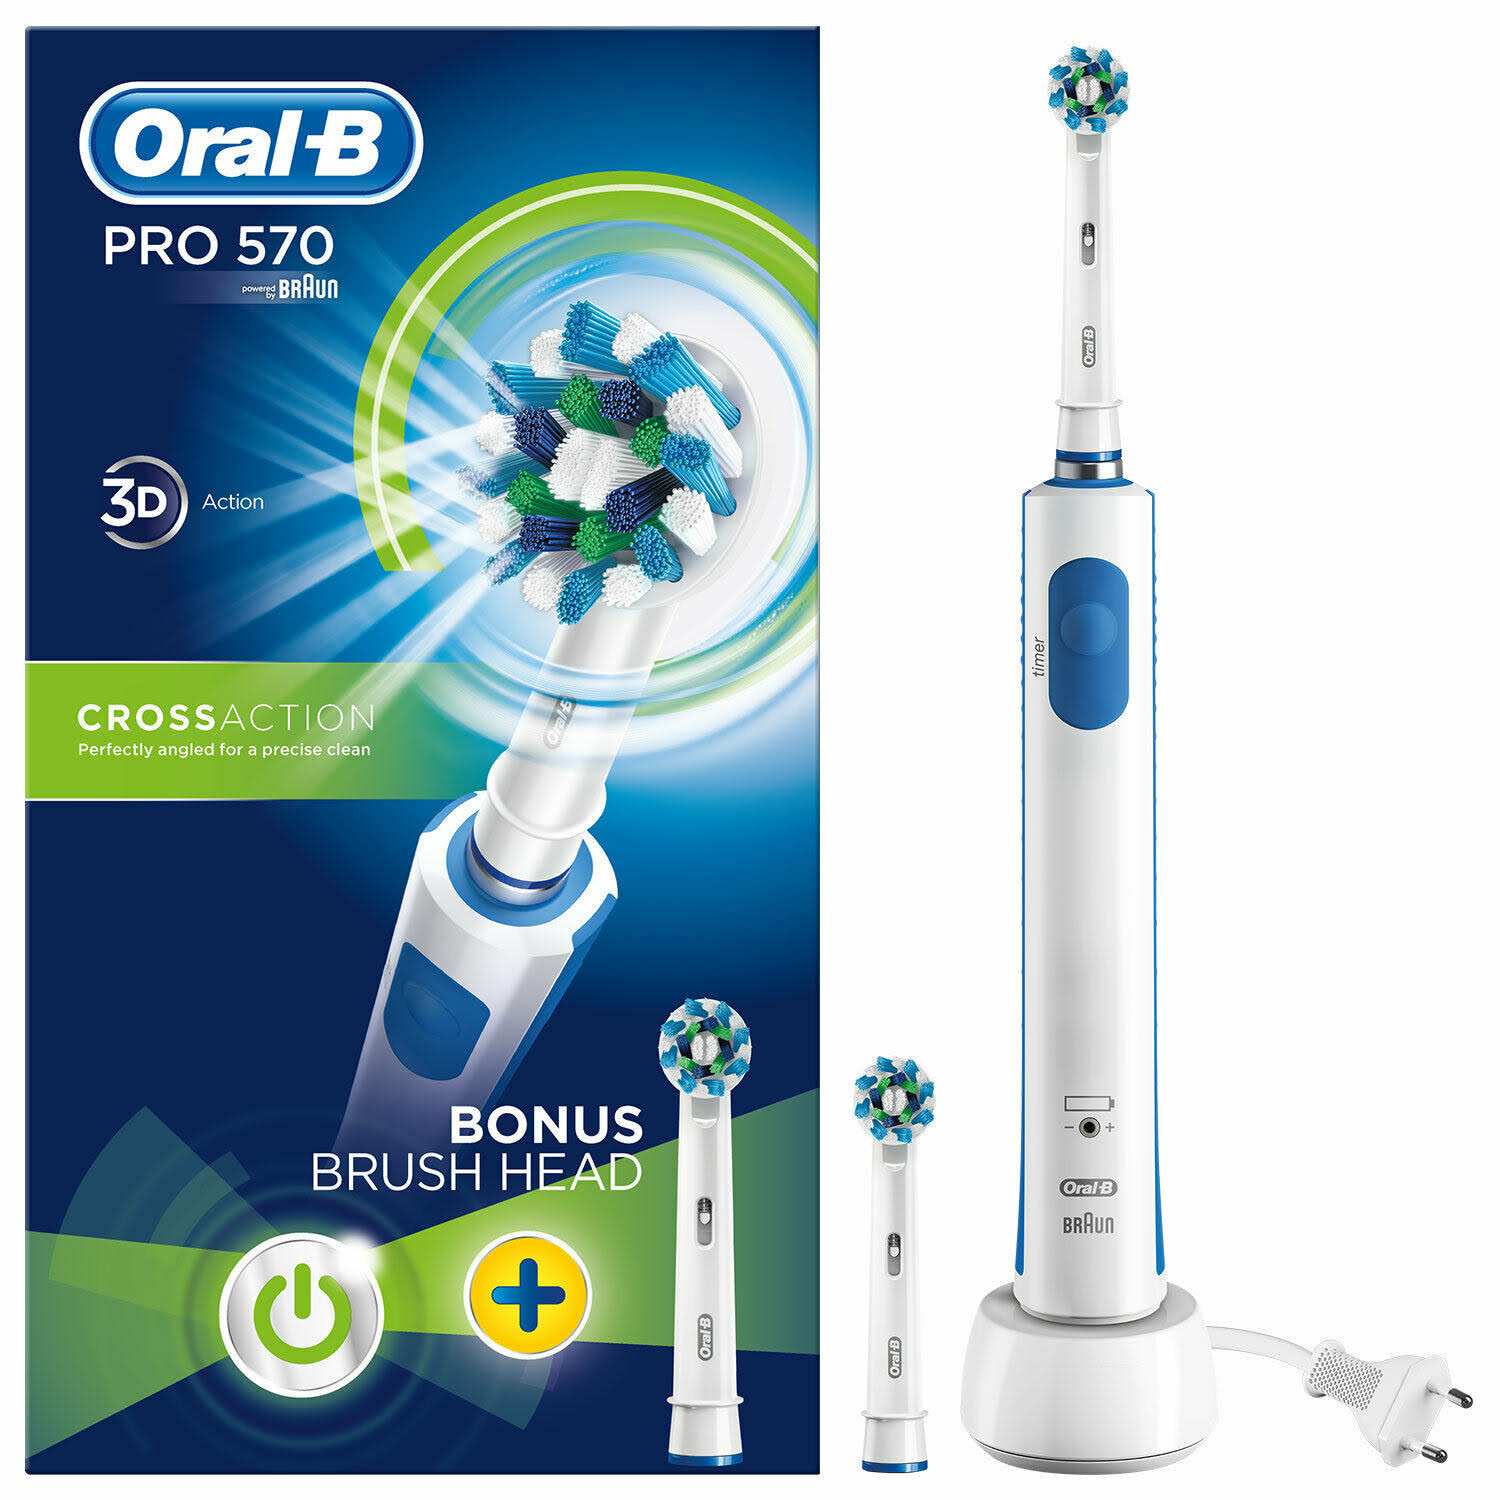 Oral-B Cross Action Pro 570 Electric Toothbrush